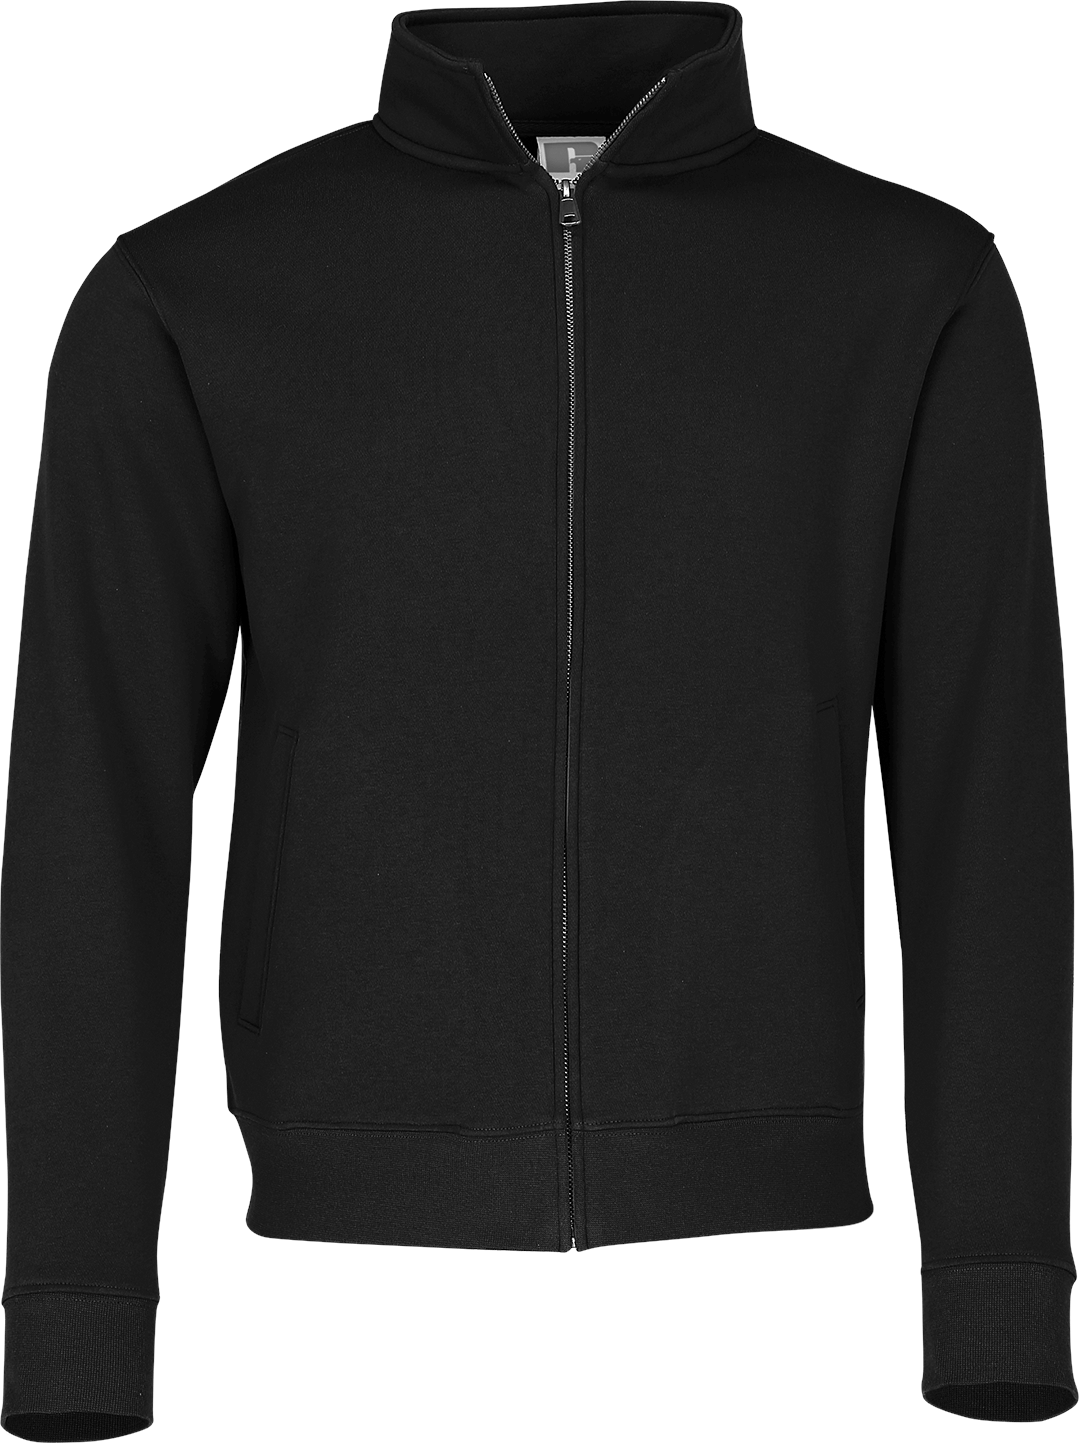 Russell Authentic Sweat Jacket, black, XL